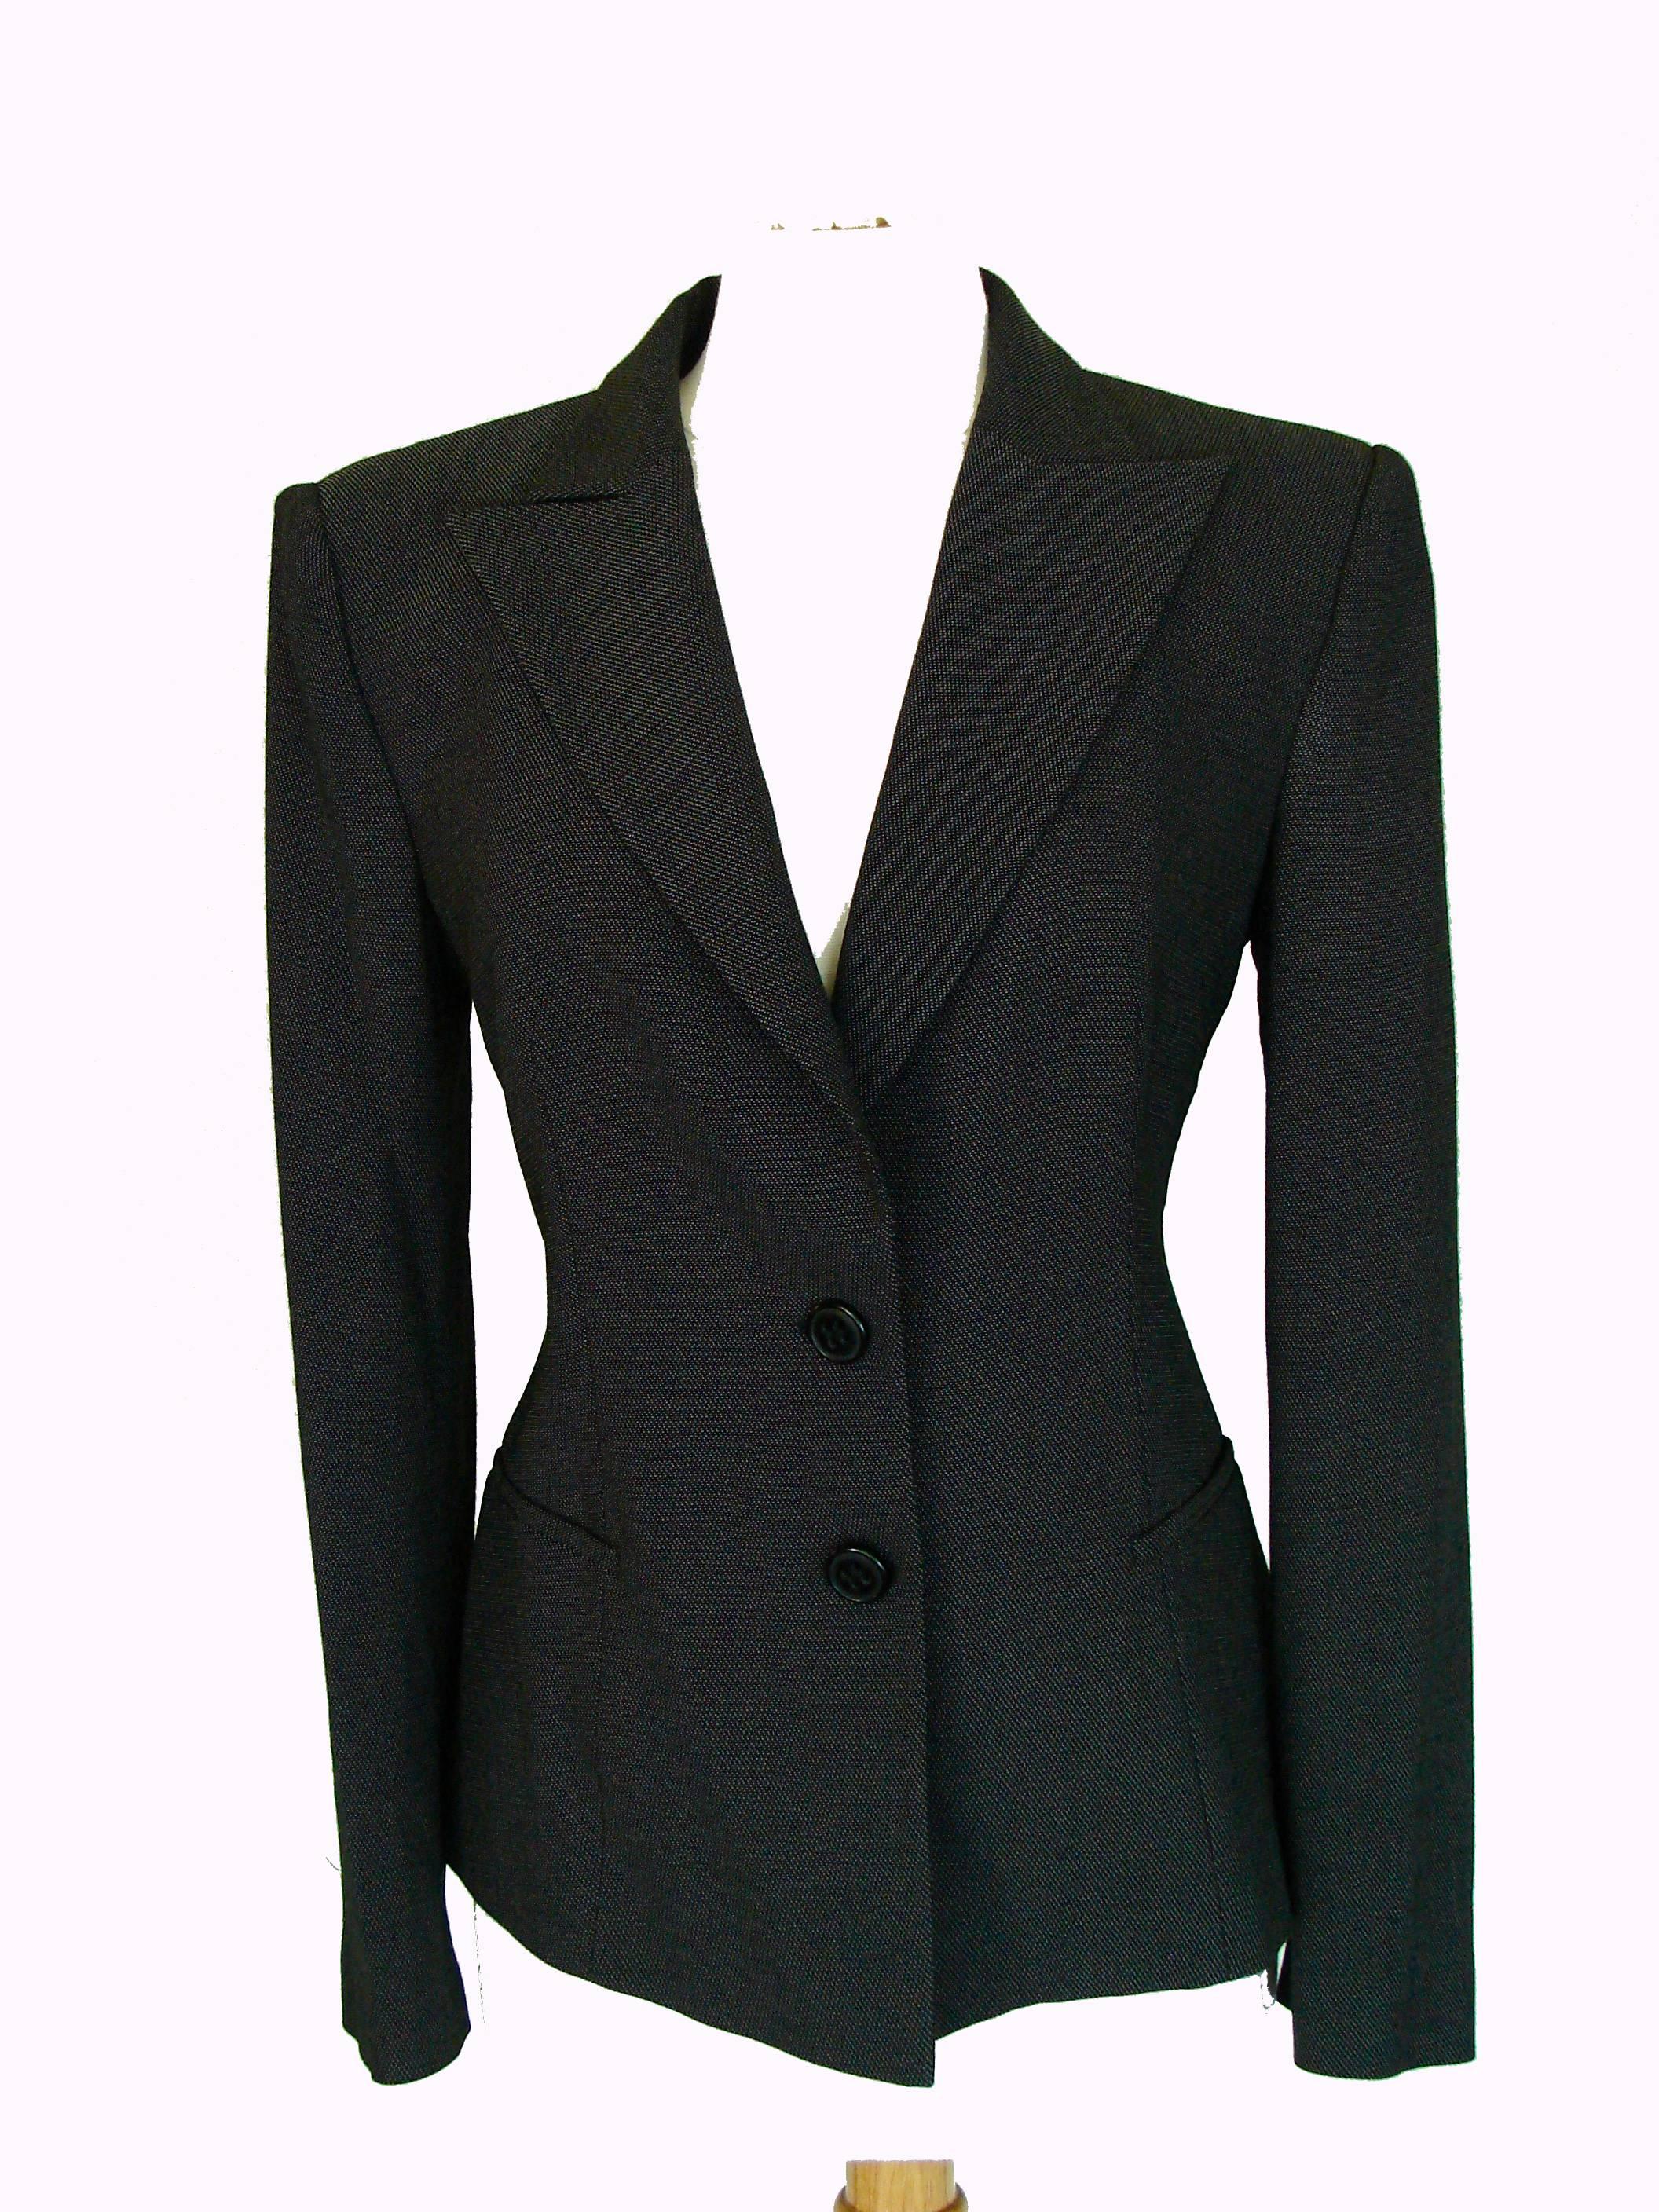 Great blazer jacket from Emporio Armani by Giorgio Armani.  In excellent condition, it's fully lined.  Tagged size 48, it measures, taken flat and doubled where appropriate: shoulders - 17